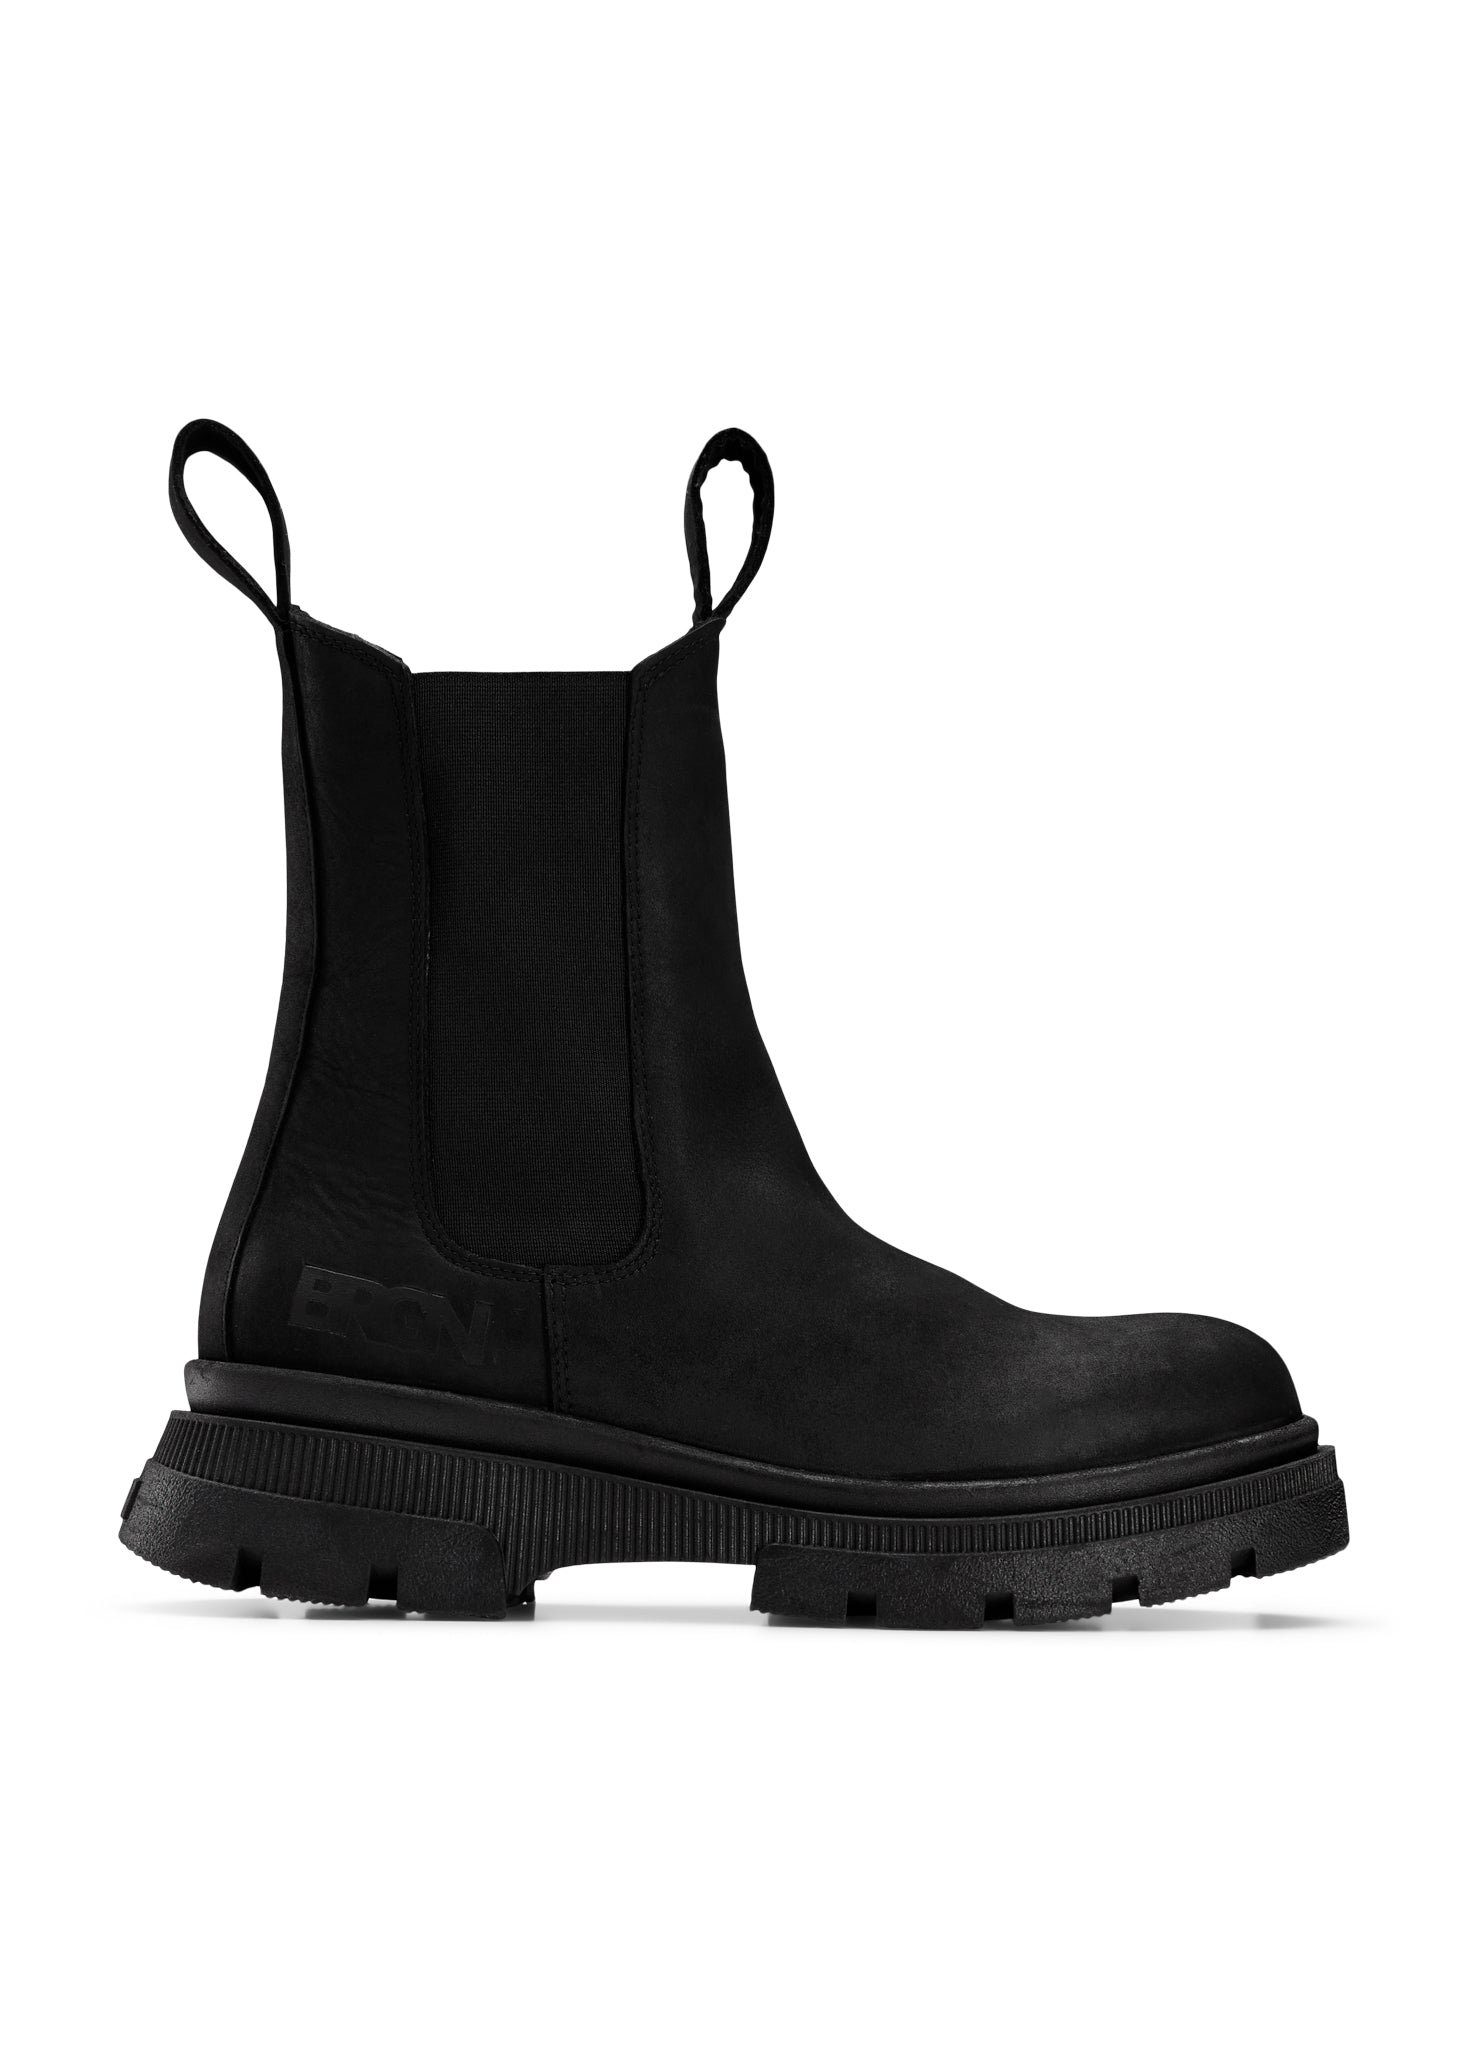 BRGN Chelsea Boot Shoes 095 New Black